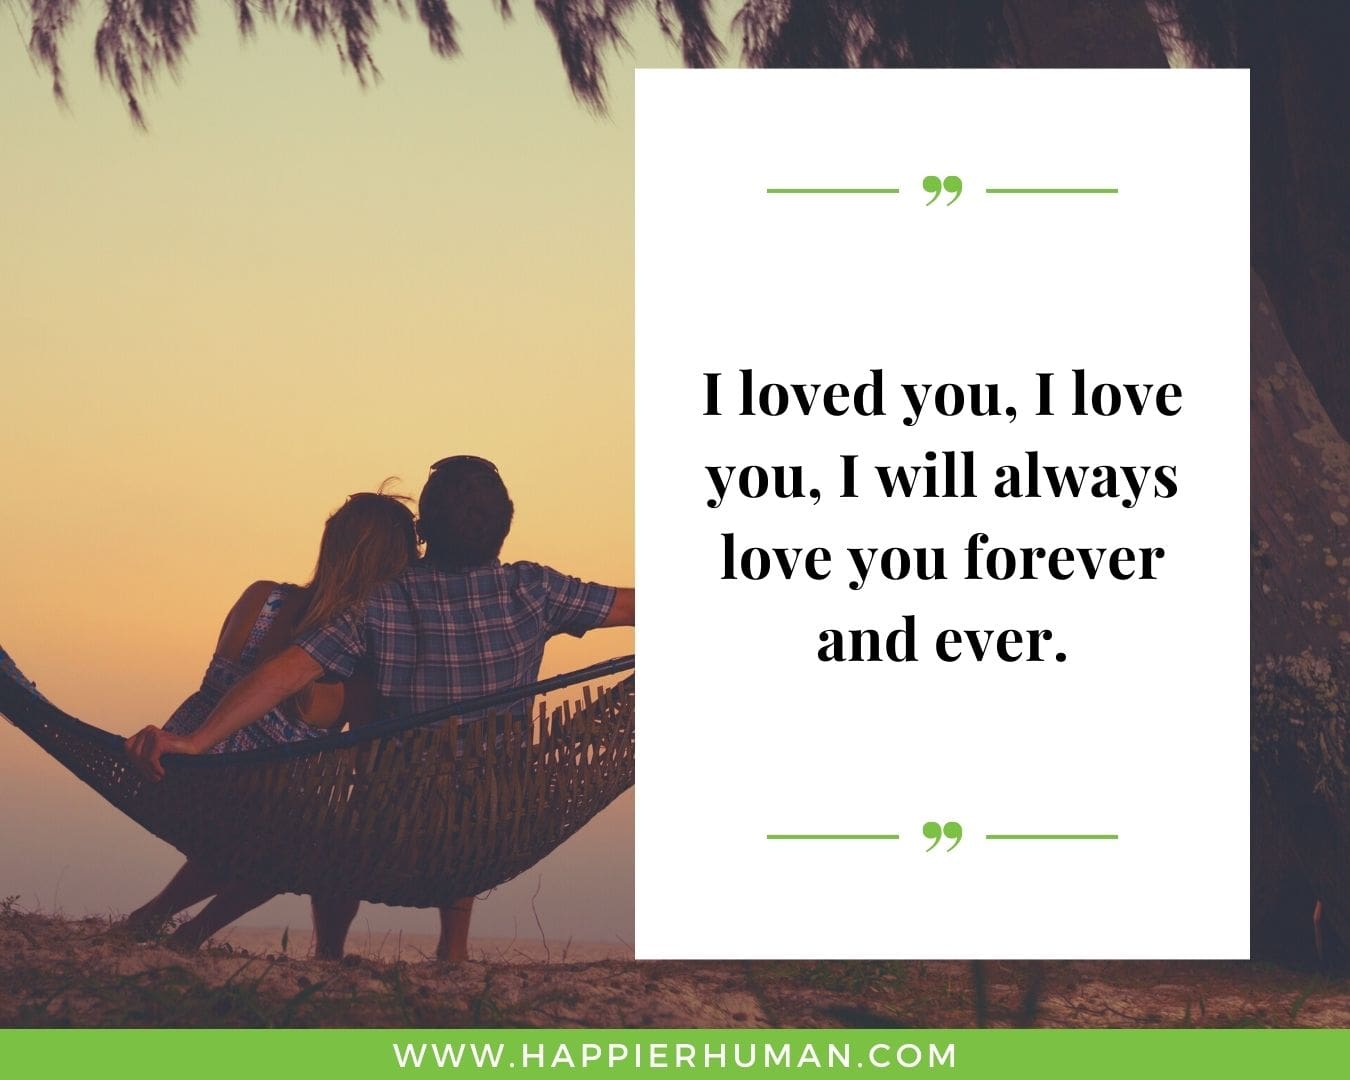 Unconditional Quotes of Love for Her - “I loved you, I love you, I will always love you forever and ever.”